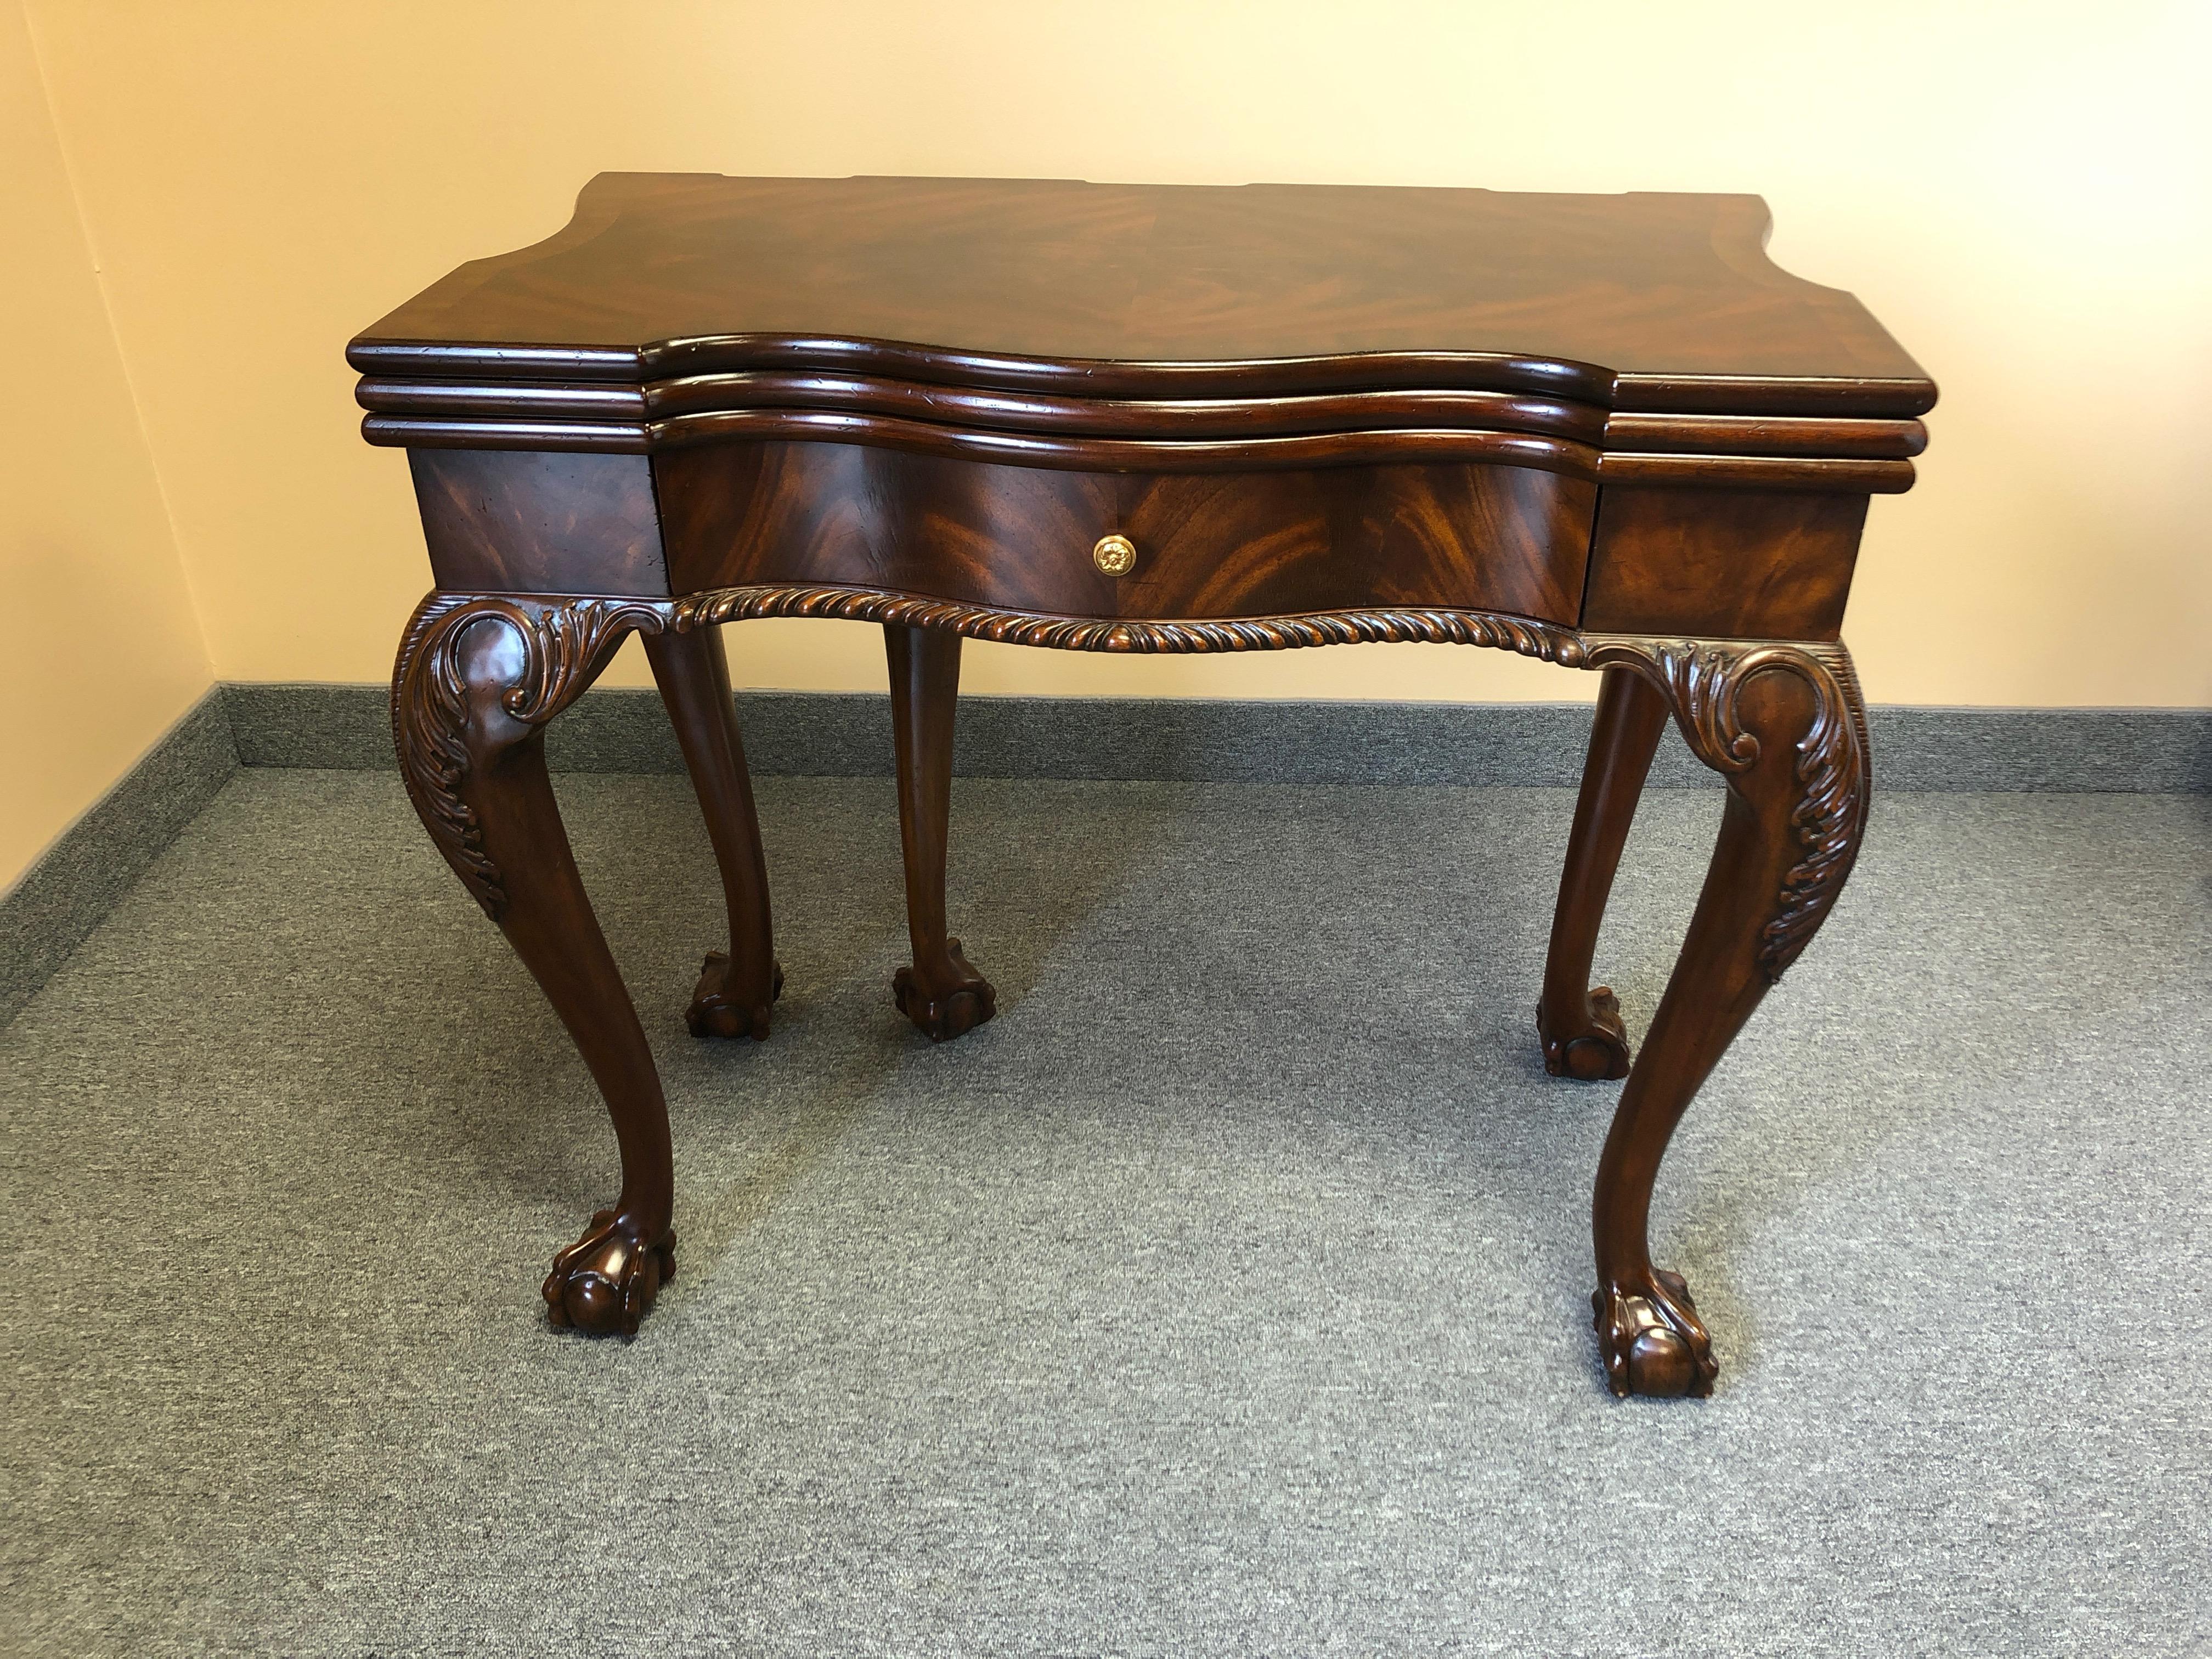 A beautifully made game table by Maitland-Smith with a variety of looks and uses. One surface is a rich flame mahogany inlaid game table for checkers, backgammon or checkers. A second top folds over to replace the game table with a sumptuous tooled